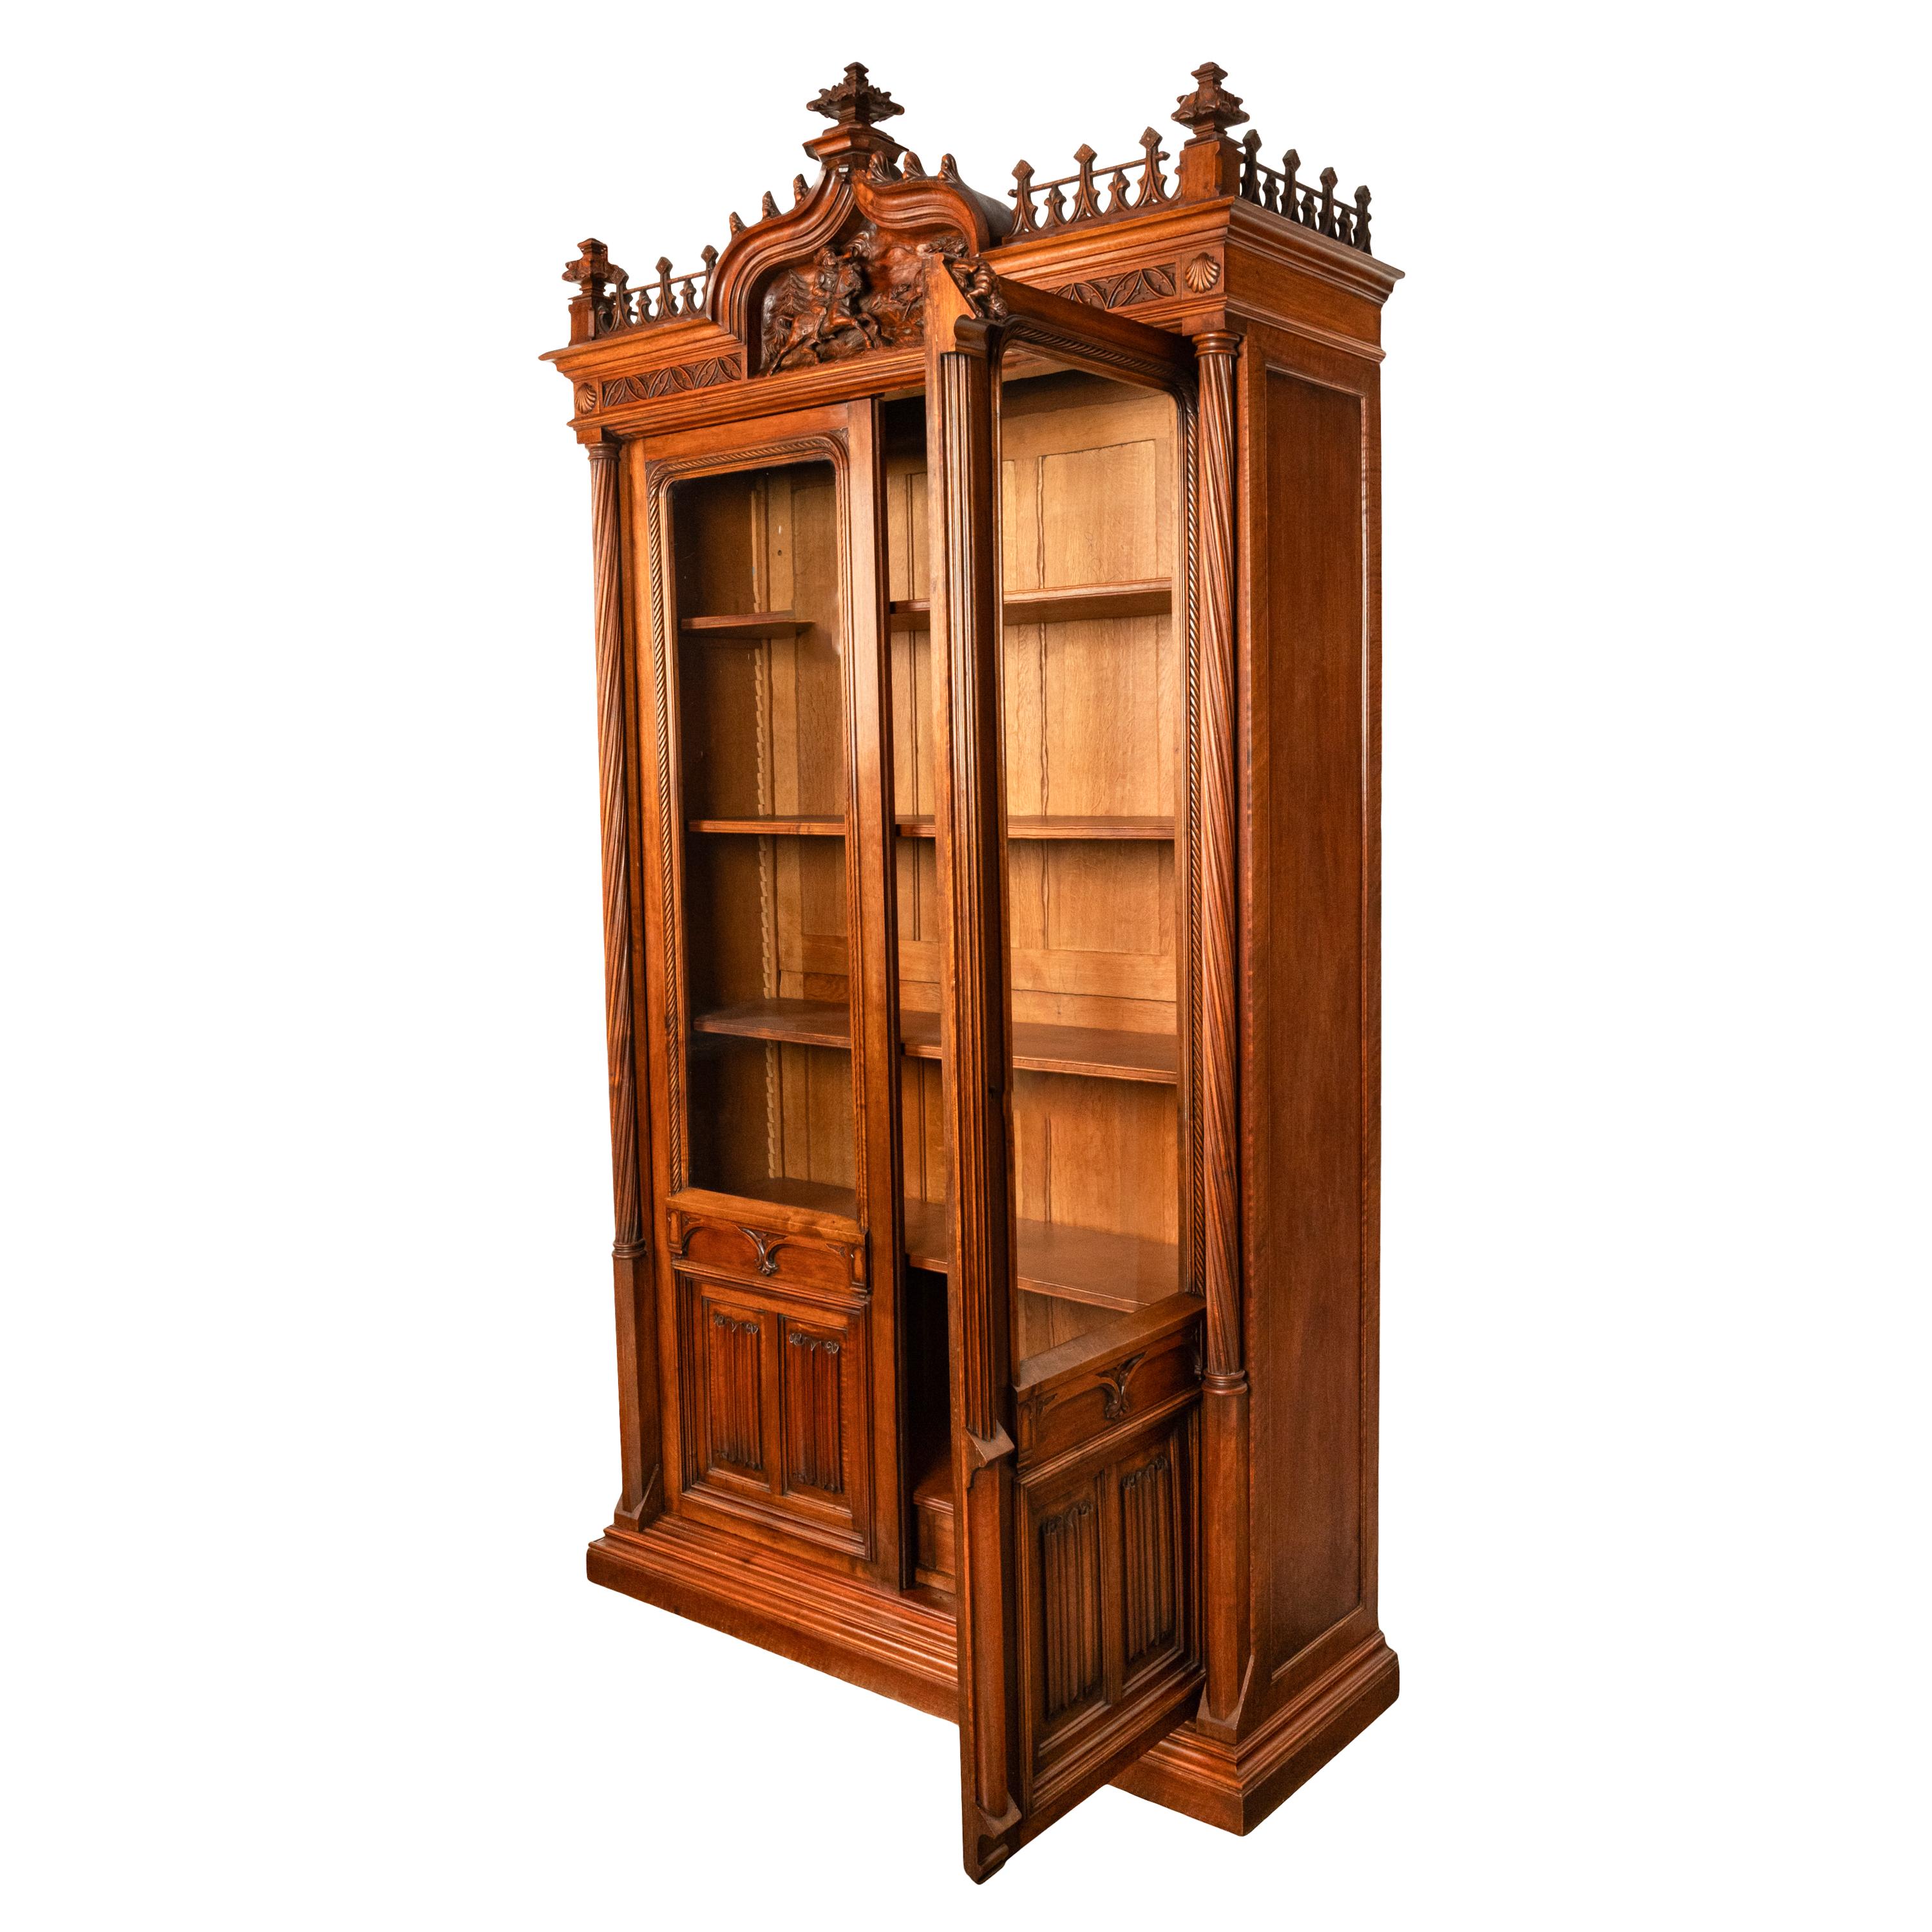 Late 19th Century Antique French Carved Oak Gothic Revival Library Bookcase Bibliotheque 1880 For Sale